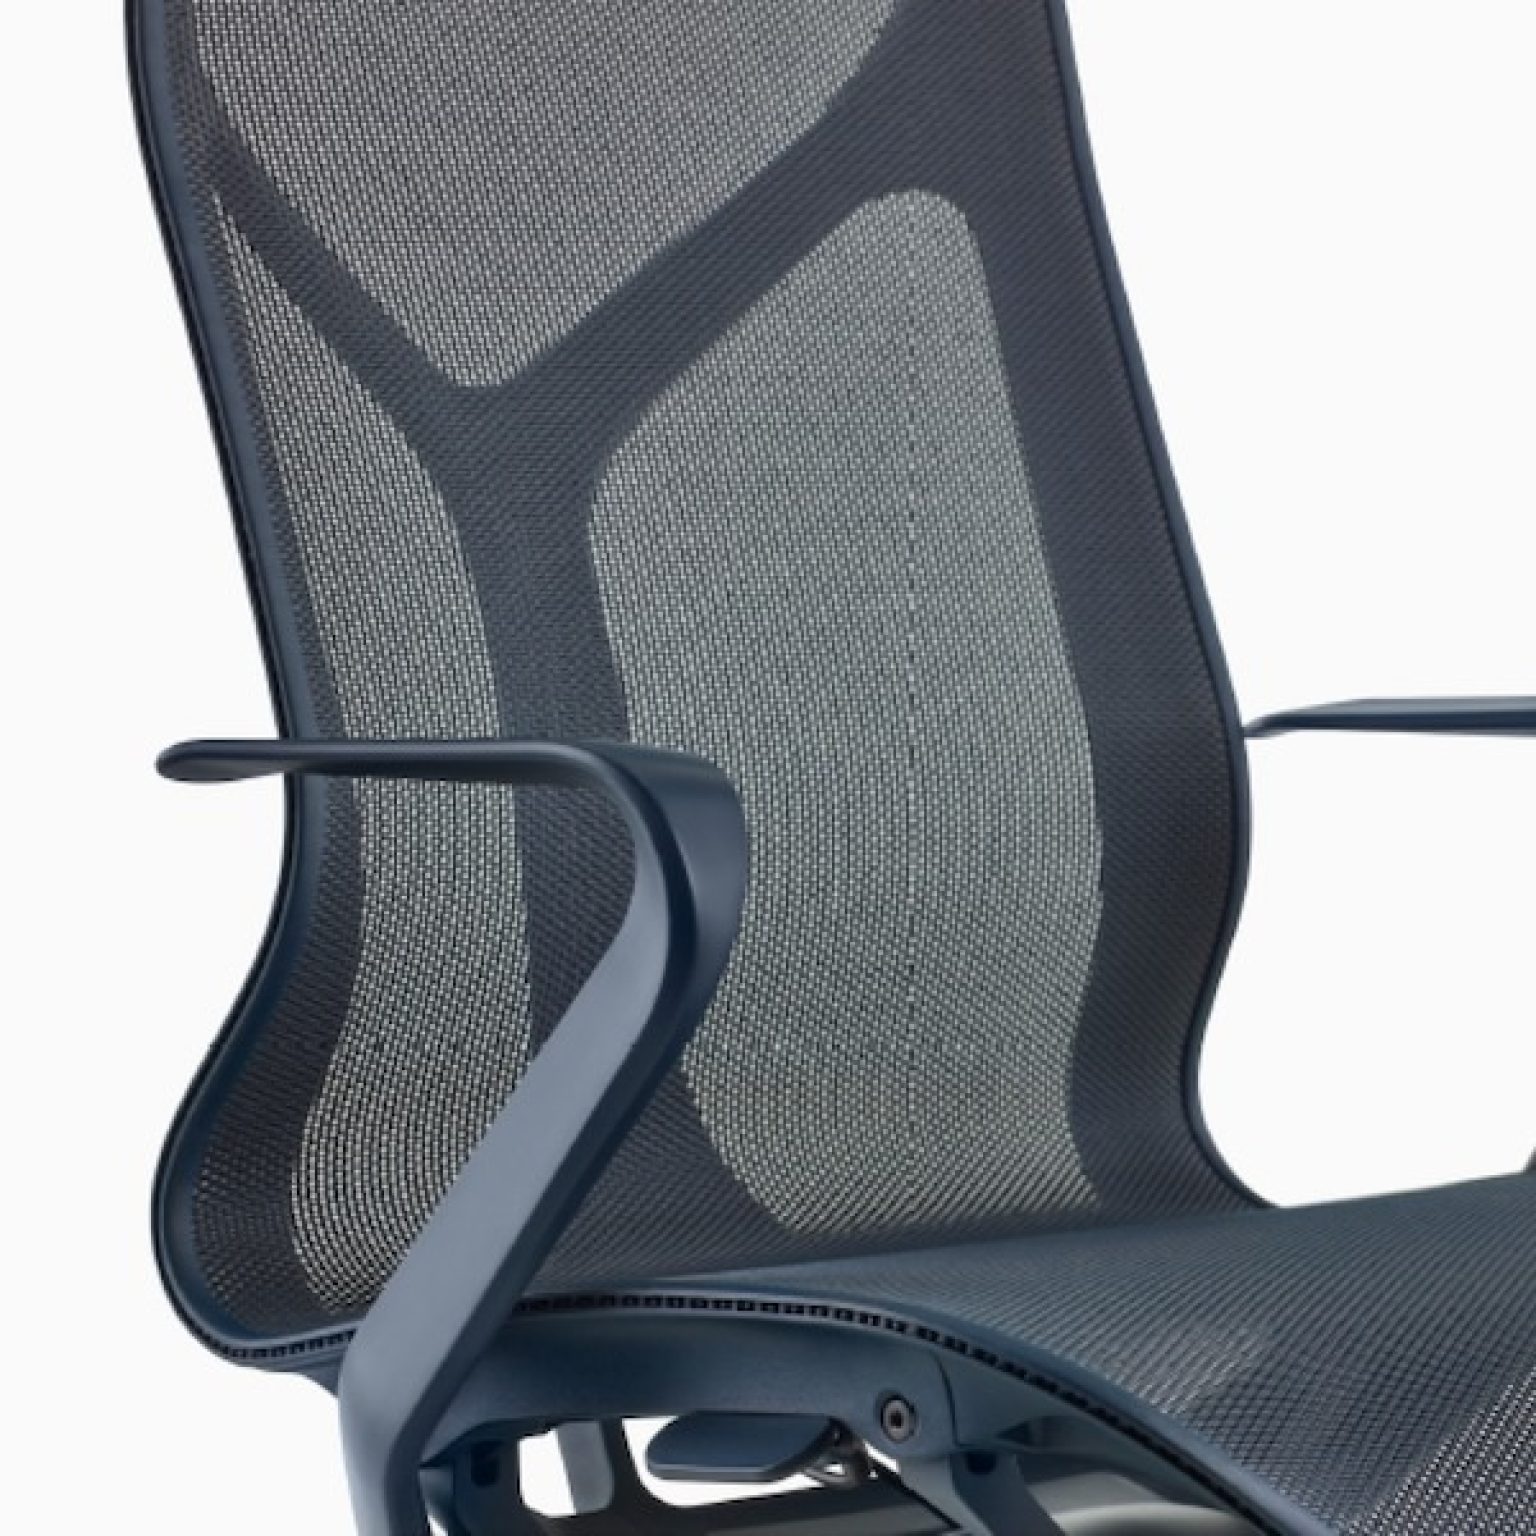 Cosm Chair Review 2022: Unique Design from Herman Miller